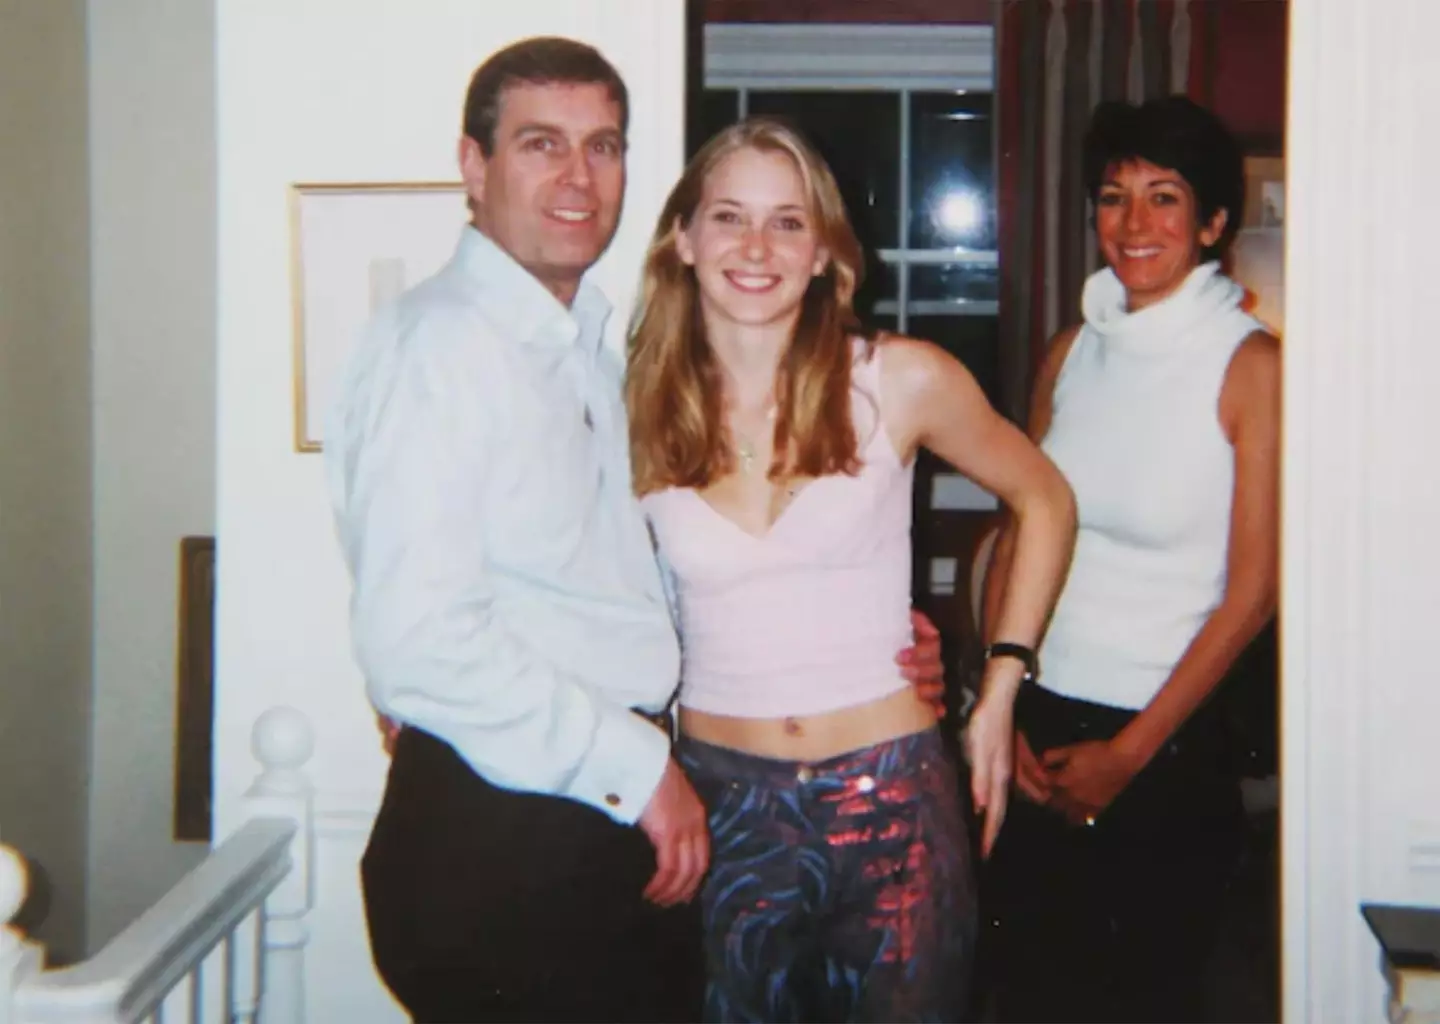 Ghislaine Maxwell and Prince Andrew pictured with Virginia Giuffre.